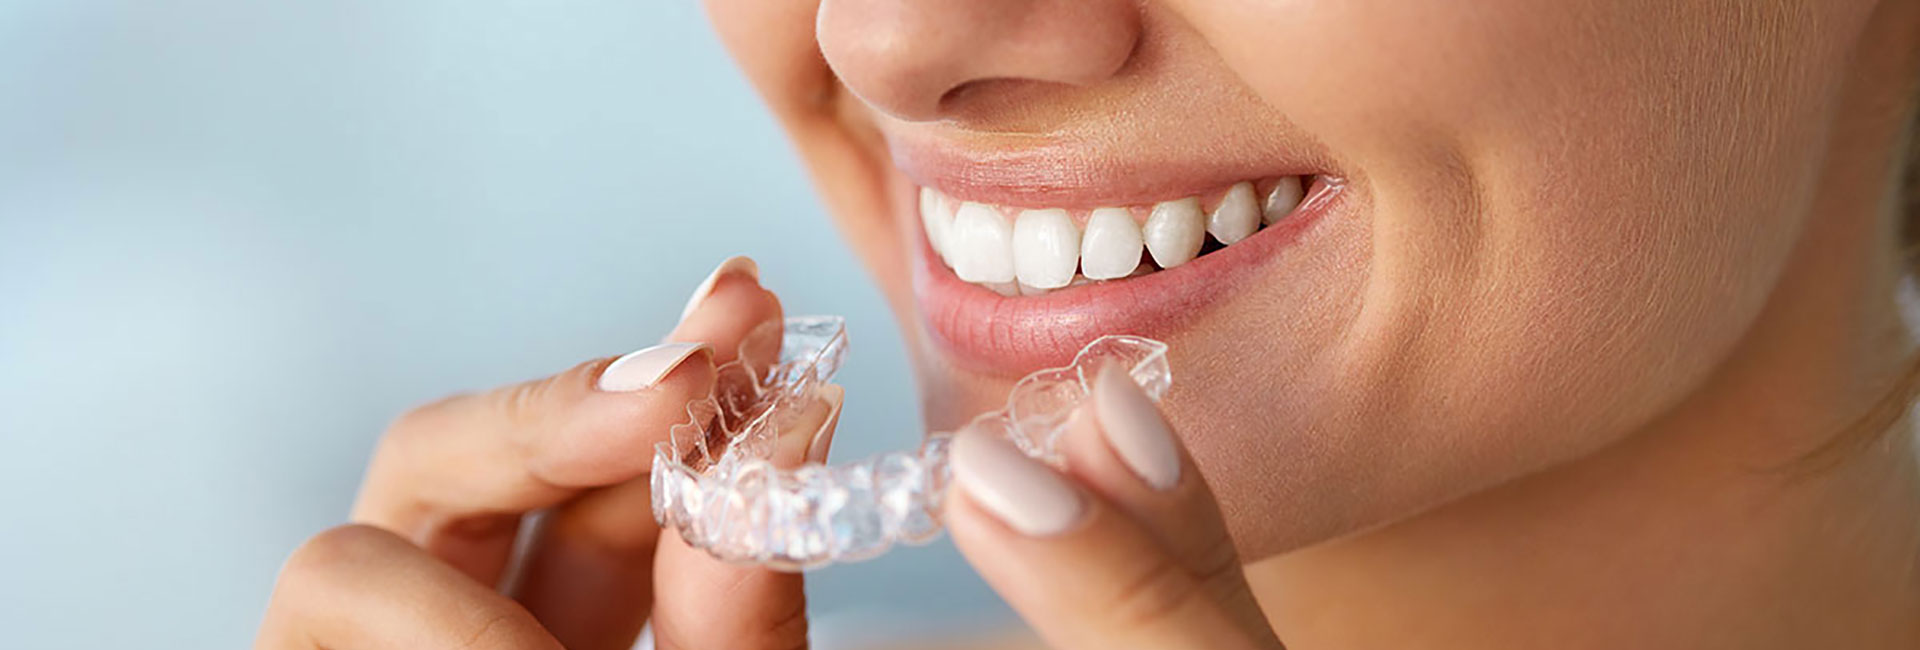 Transform Your Smile and Oral Health with Discreet ClearCorrect Aligners